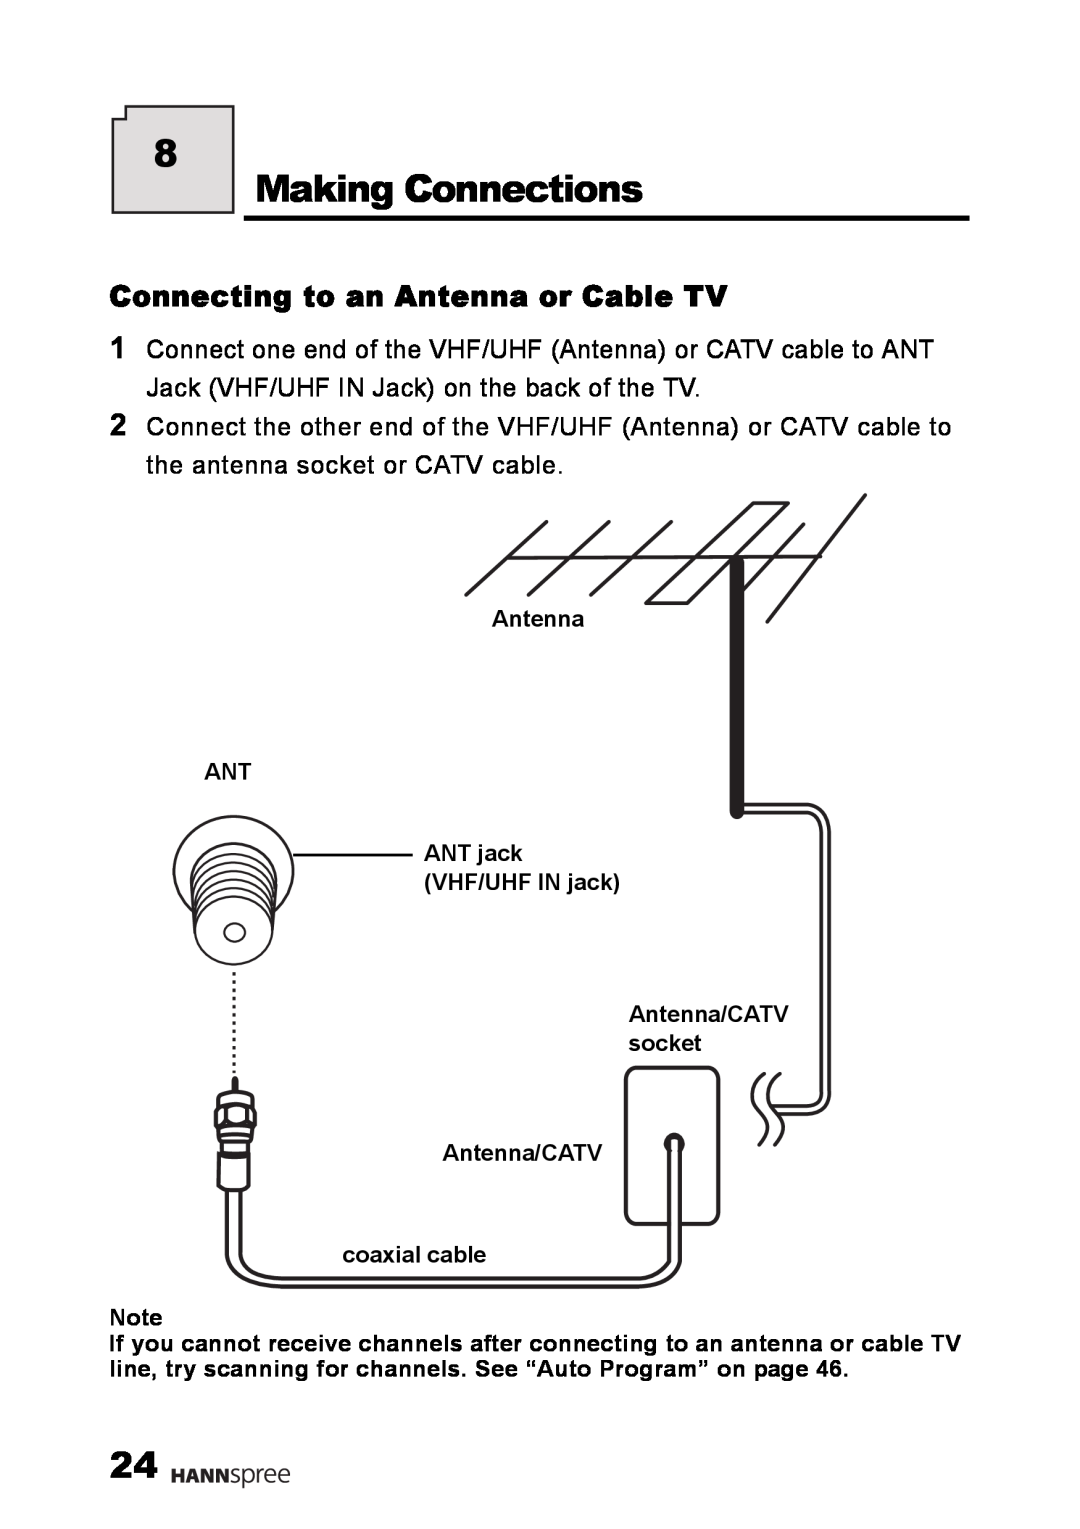 HANNspree LT02-12U1-000 user manual Making Connections, Connecting to an Antenna or Cable TV 